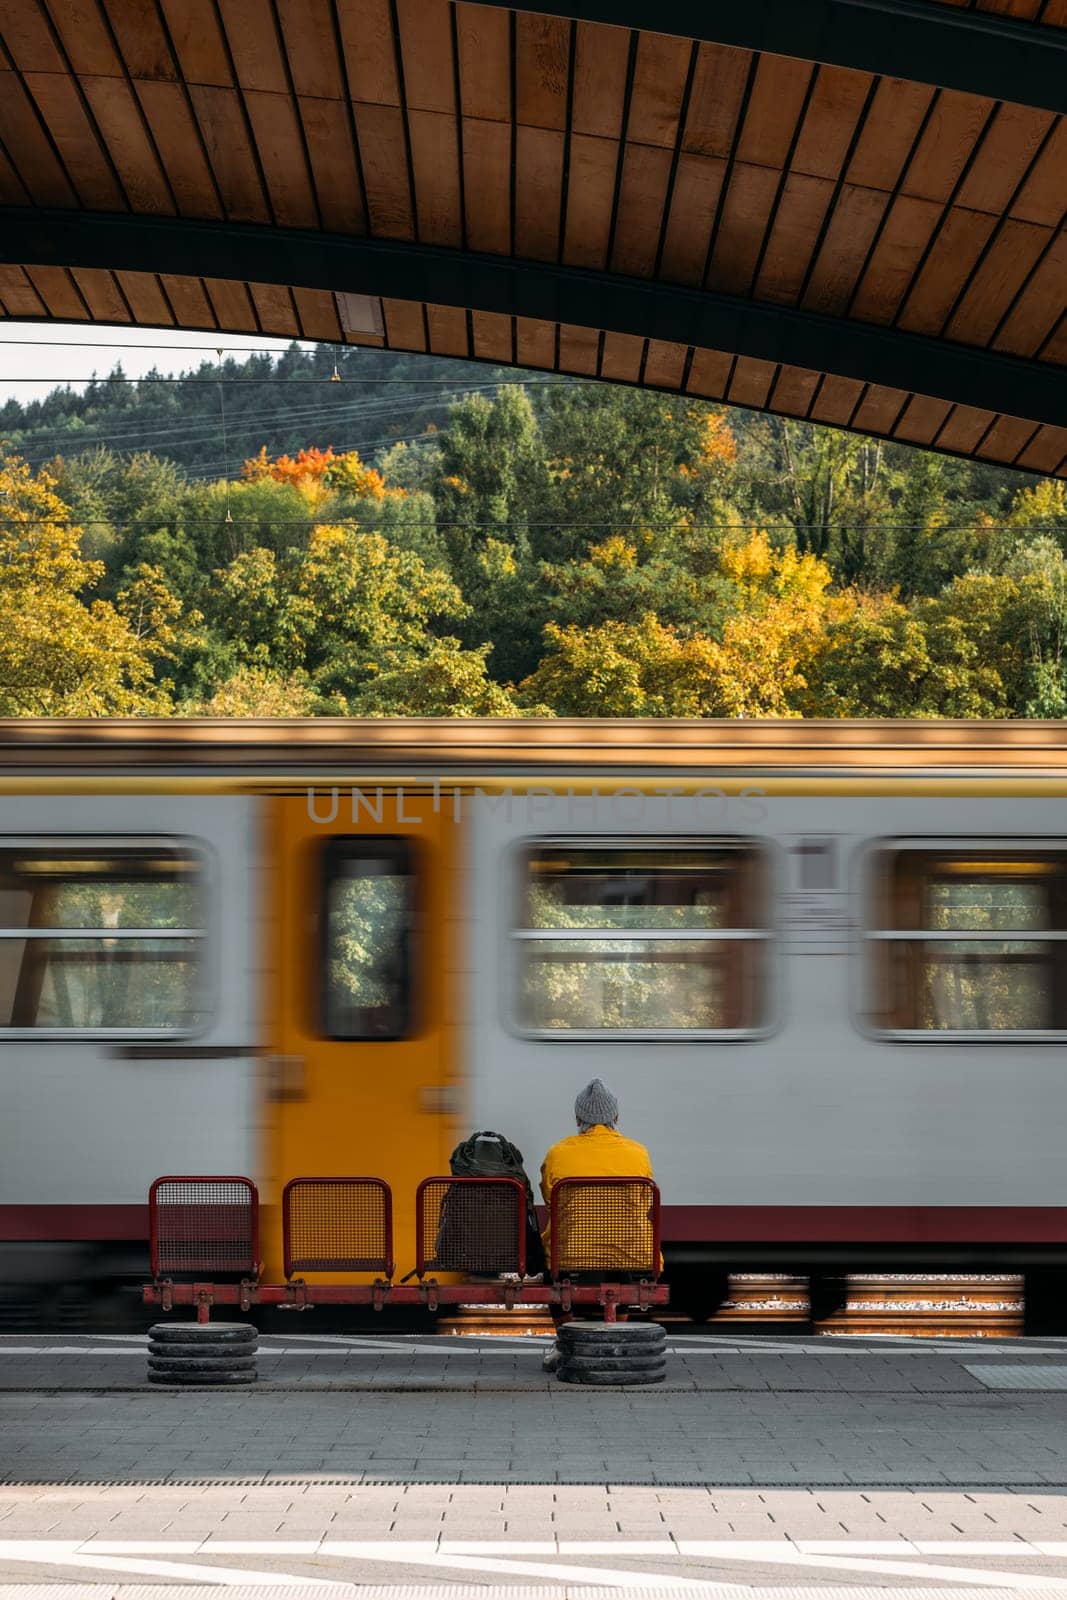 Train arrives at station where passenger sits waiting for journey by apavlin